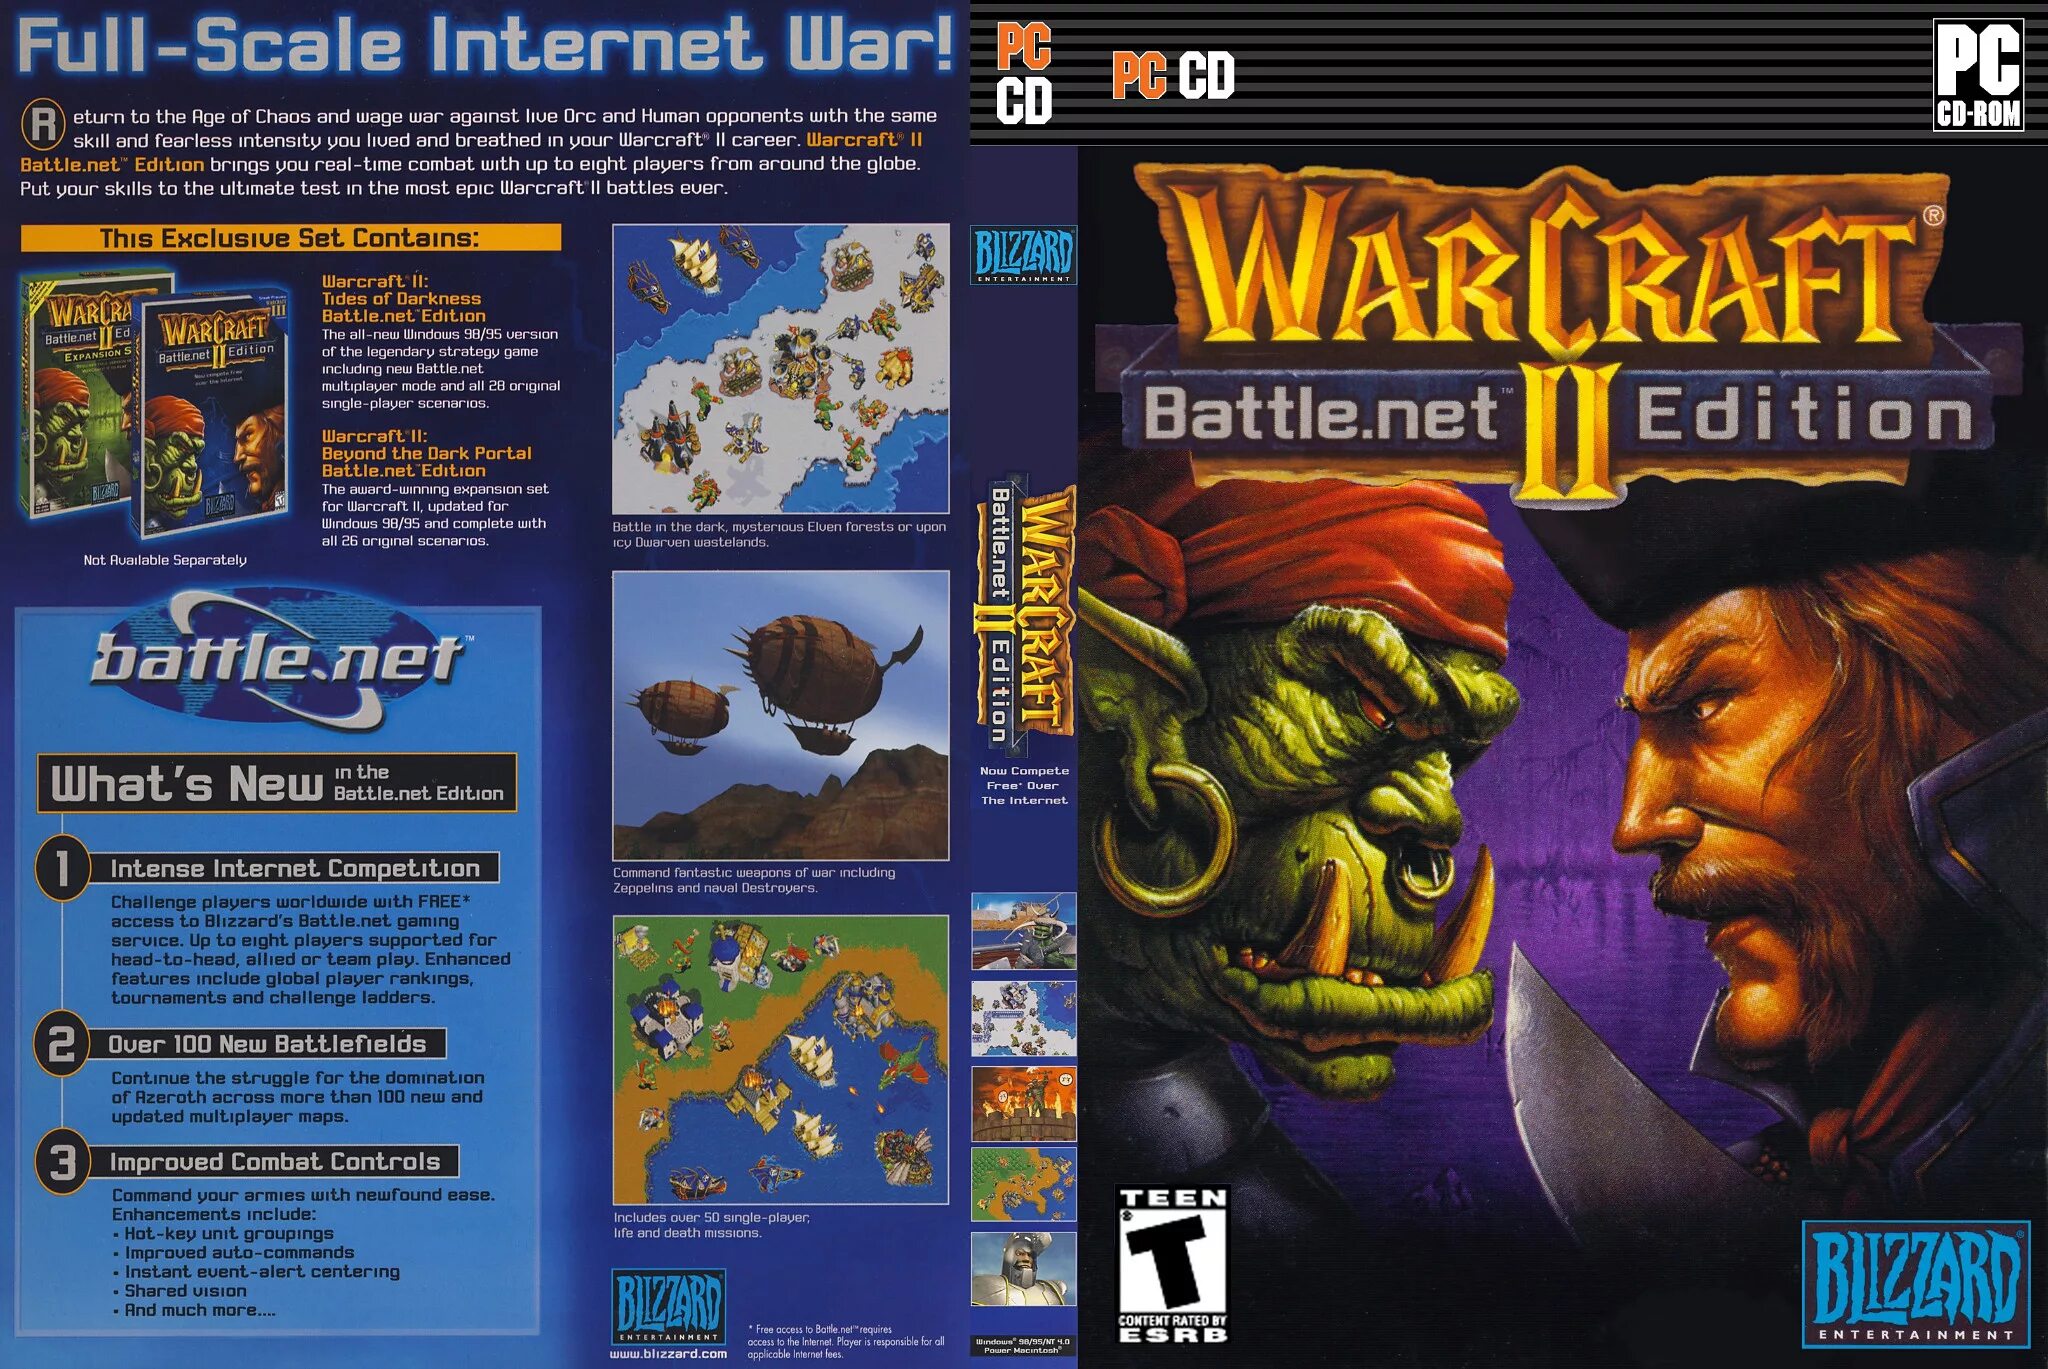 Csw tides of darkness. Warcraft 2 Tides of Darkness обложка. Warcraft 2 ps1 диски. Warcraft 2 ps1 Cover. Warcraft 2 ps1 обложка.